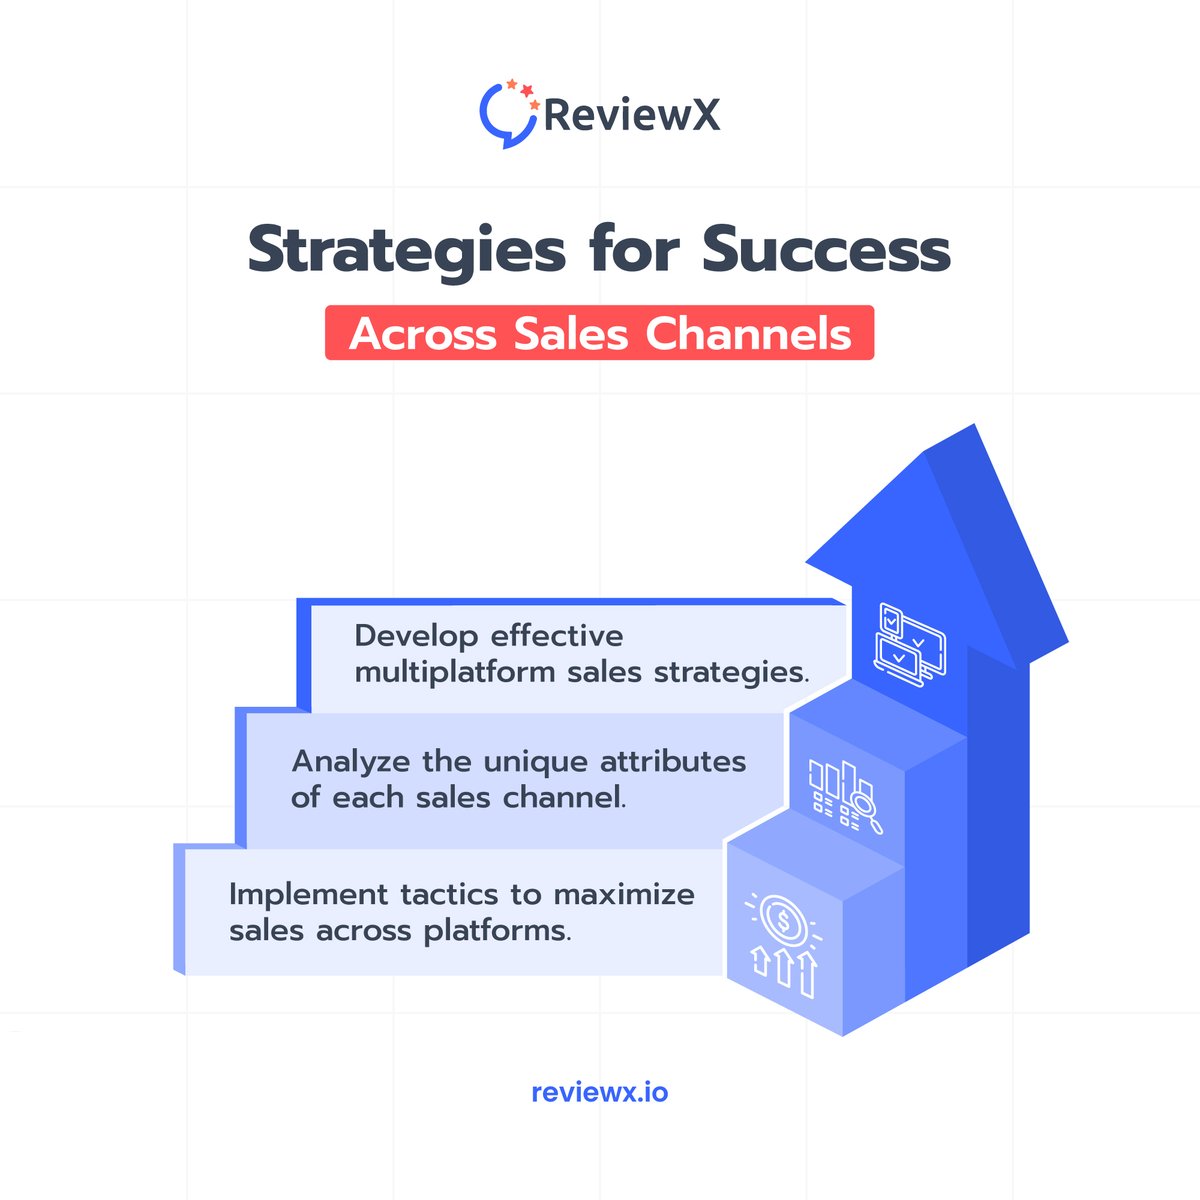 Get success across every sales channel!

#ReviewX #Facts #WordPressPlugin #WooCommerceReviews #wordpressreviewplugin #reviews #ecommerce #ecommercefacts